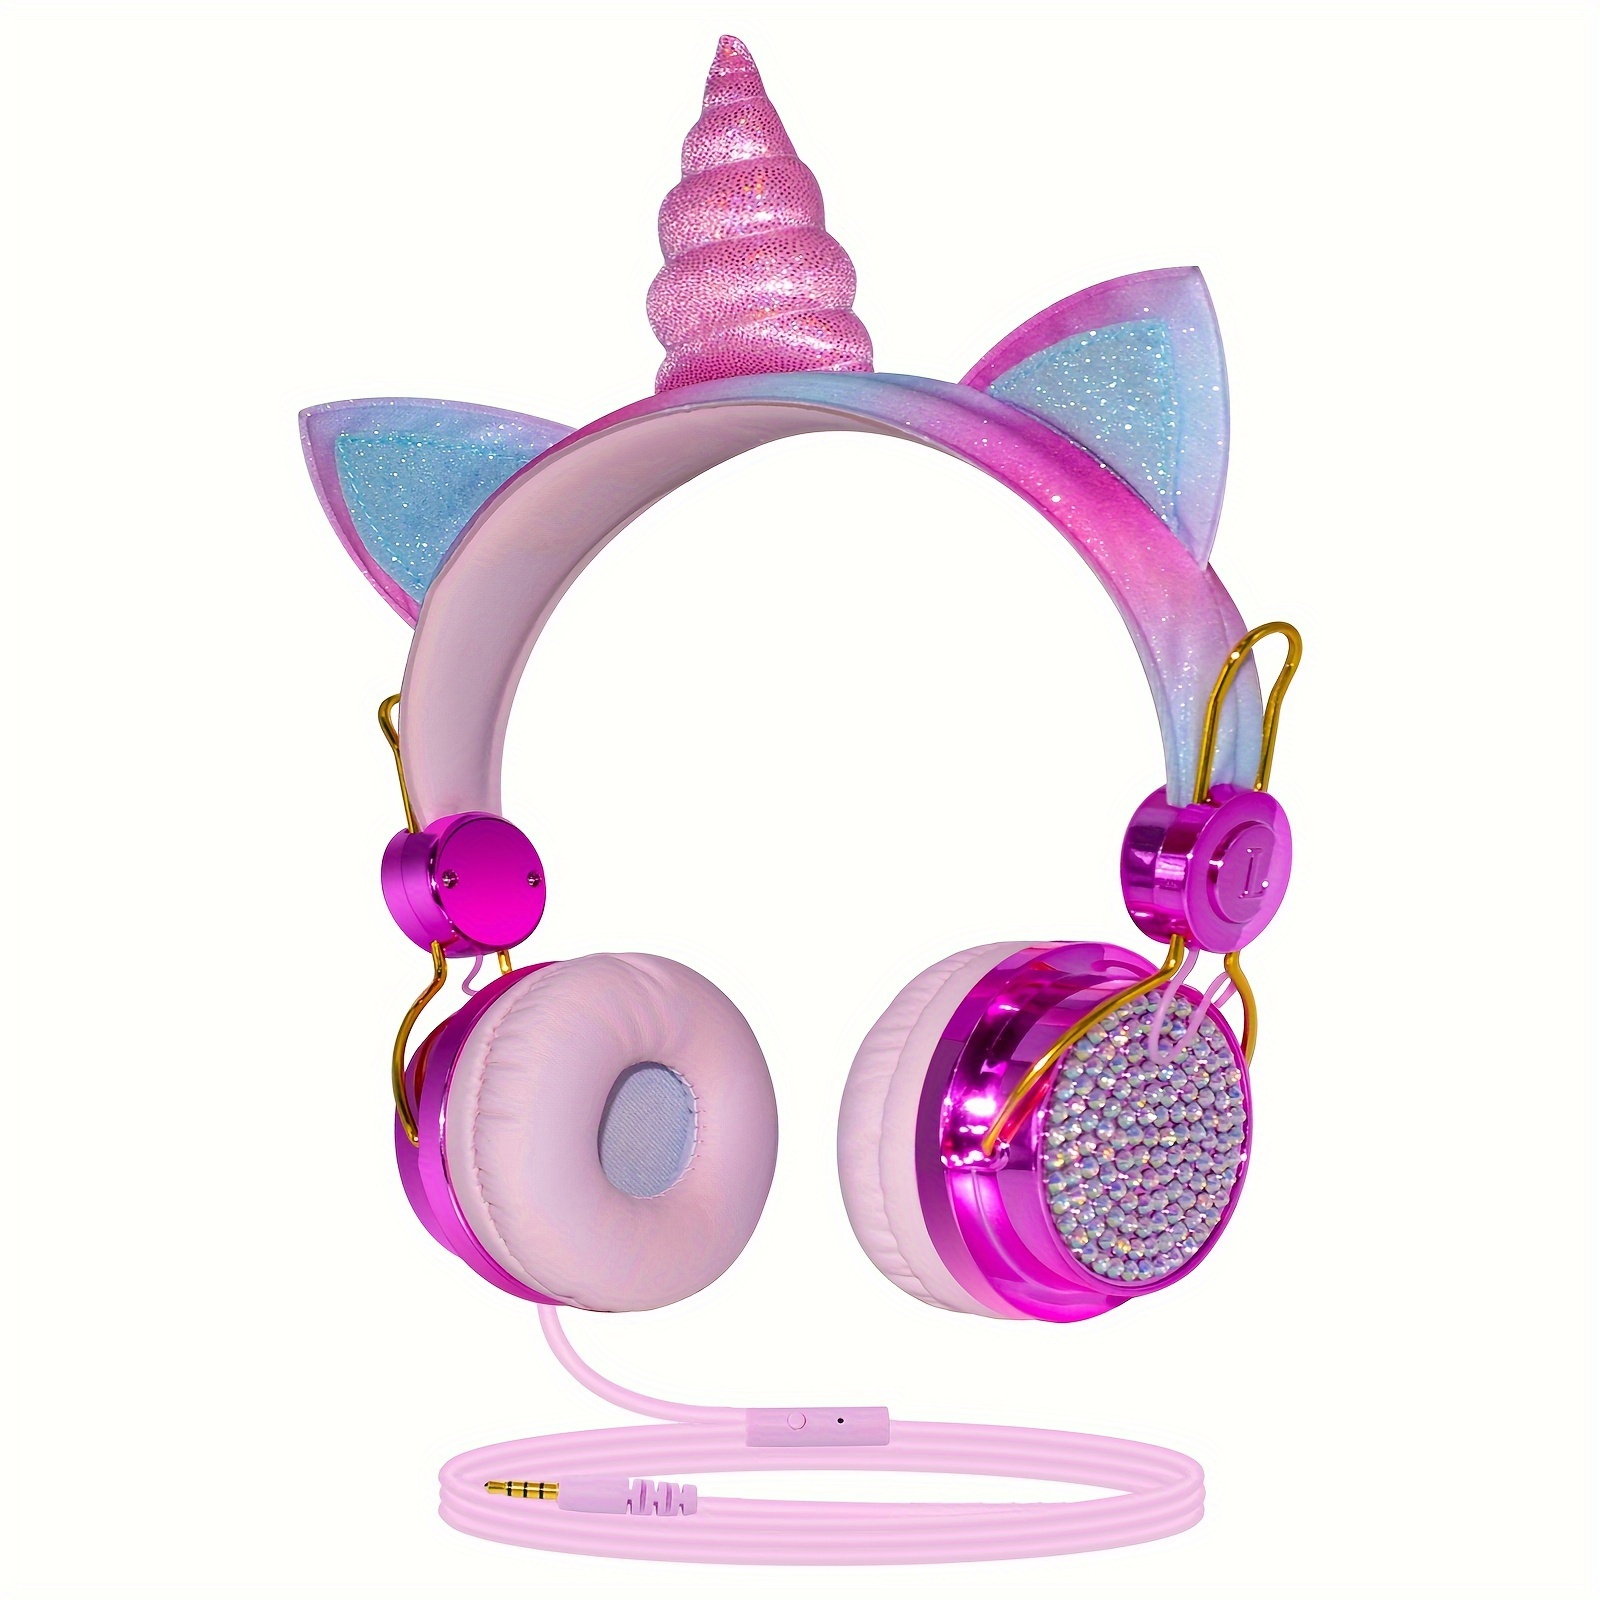 

Headphones, Headphones With 98db Volume Limited For Girls, 3.5mm Jack Over On Ear Girl Headphone With Microphone